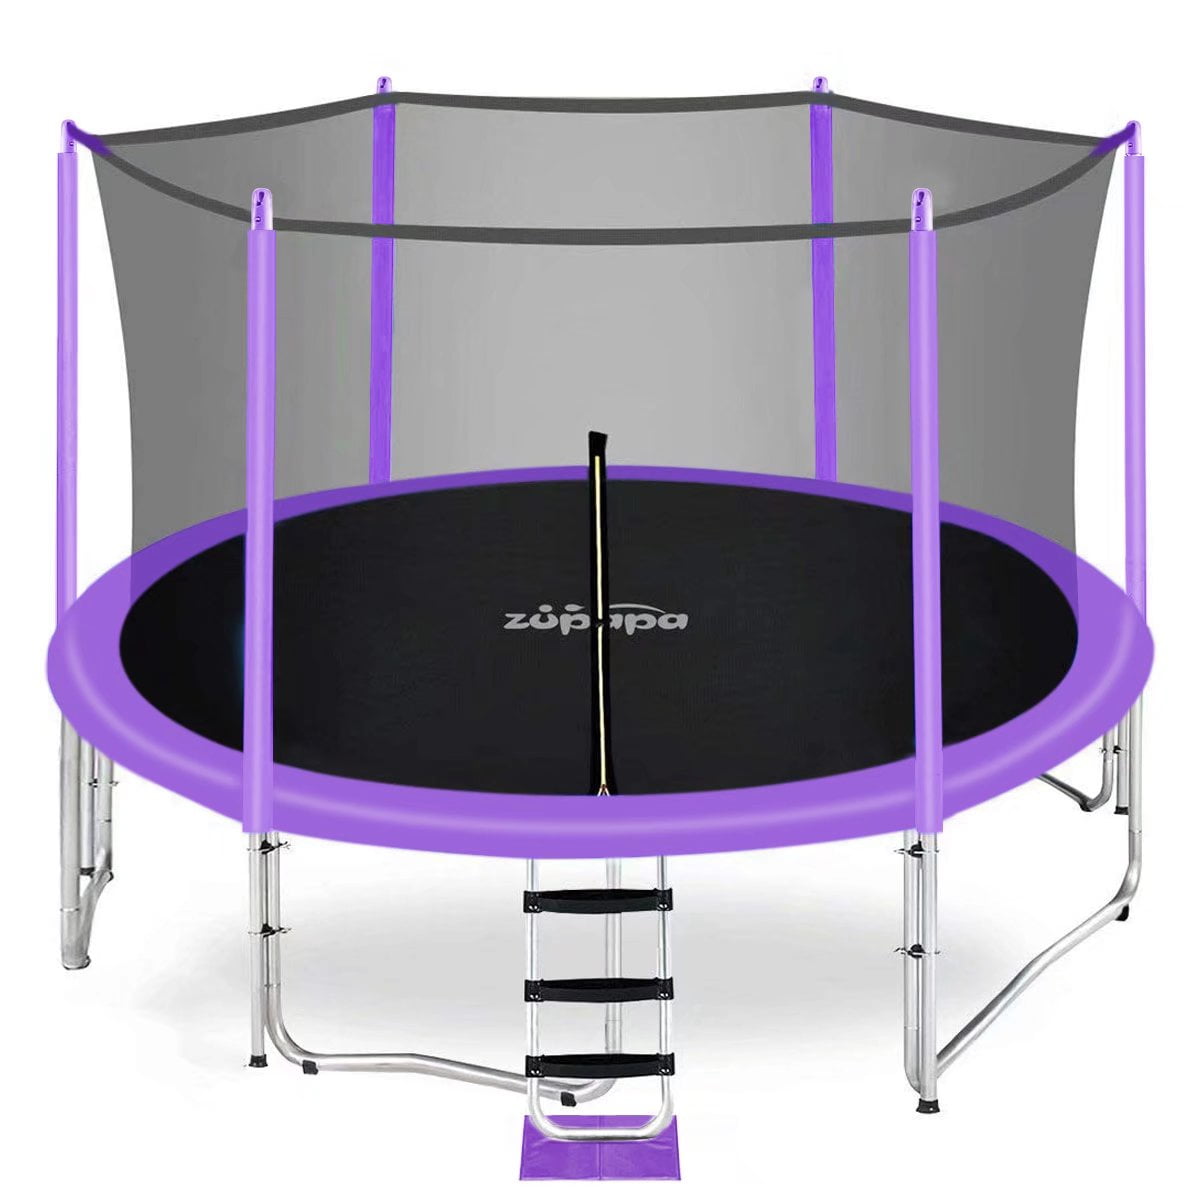 Zupapa 15FT 14FT 10FT Kids Trampoline 425LBS Weight with Enclosure net Include All Accessories Outdoor Backyard Walmart.com